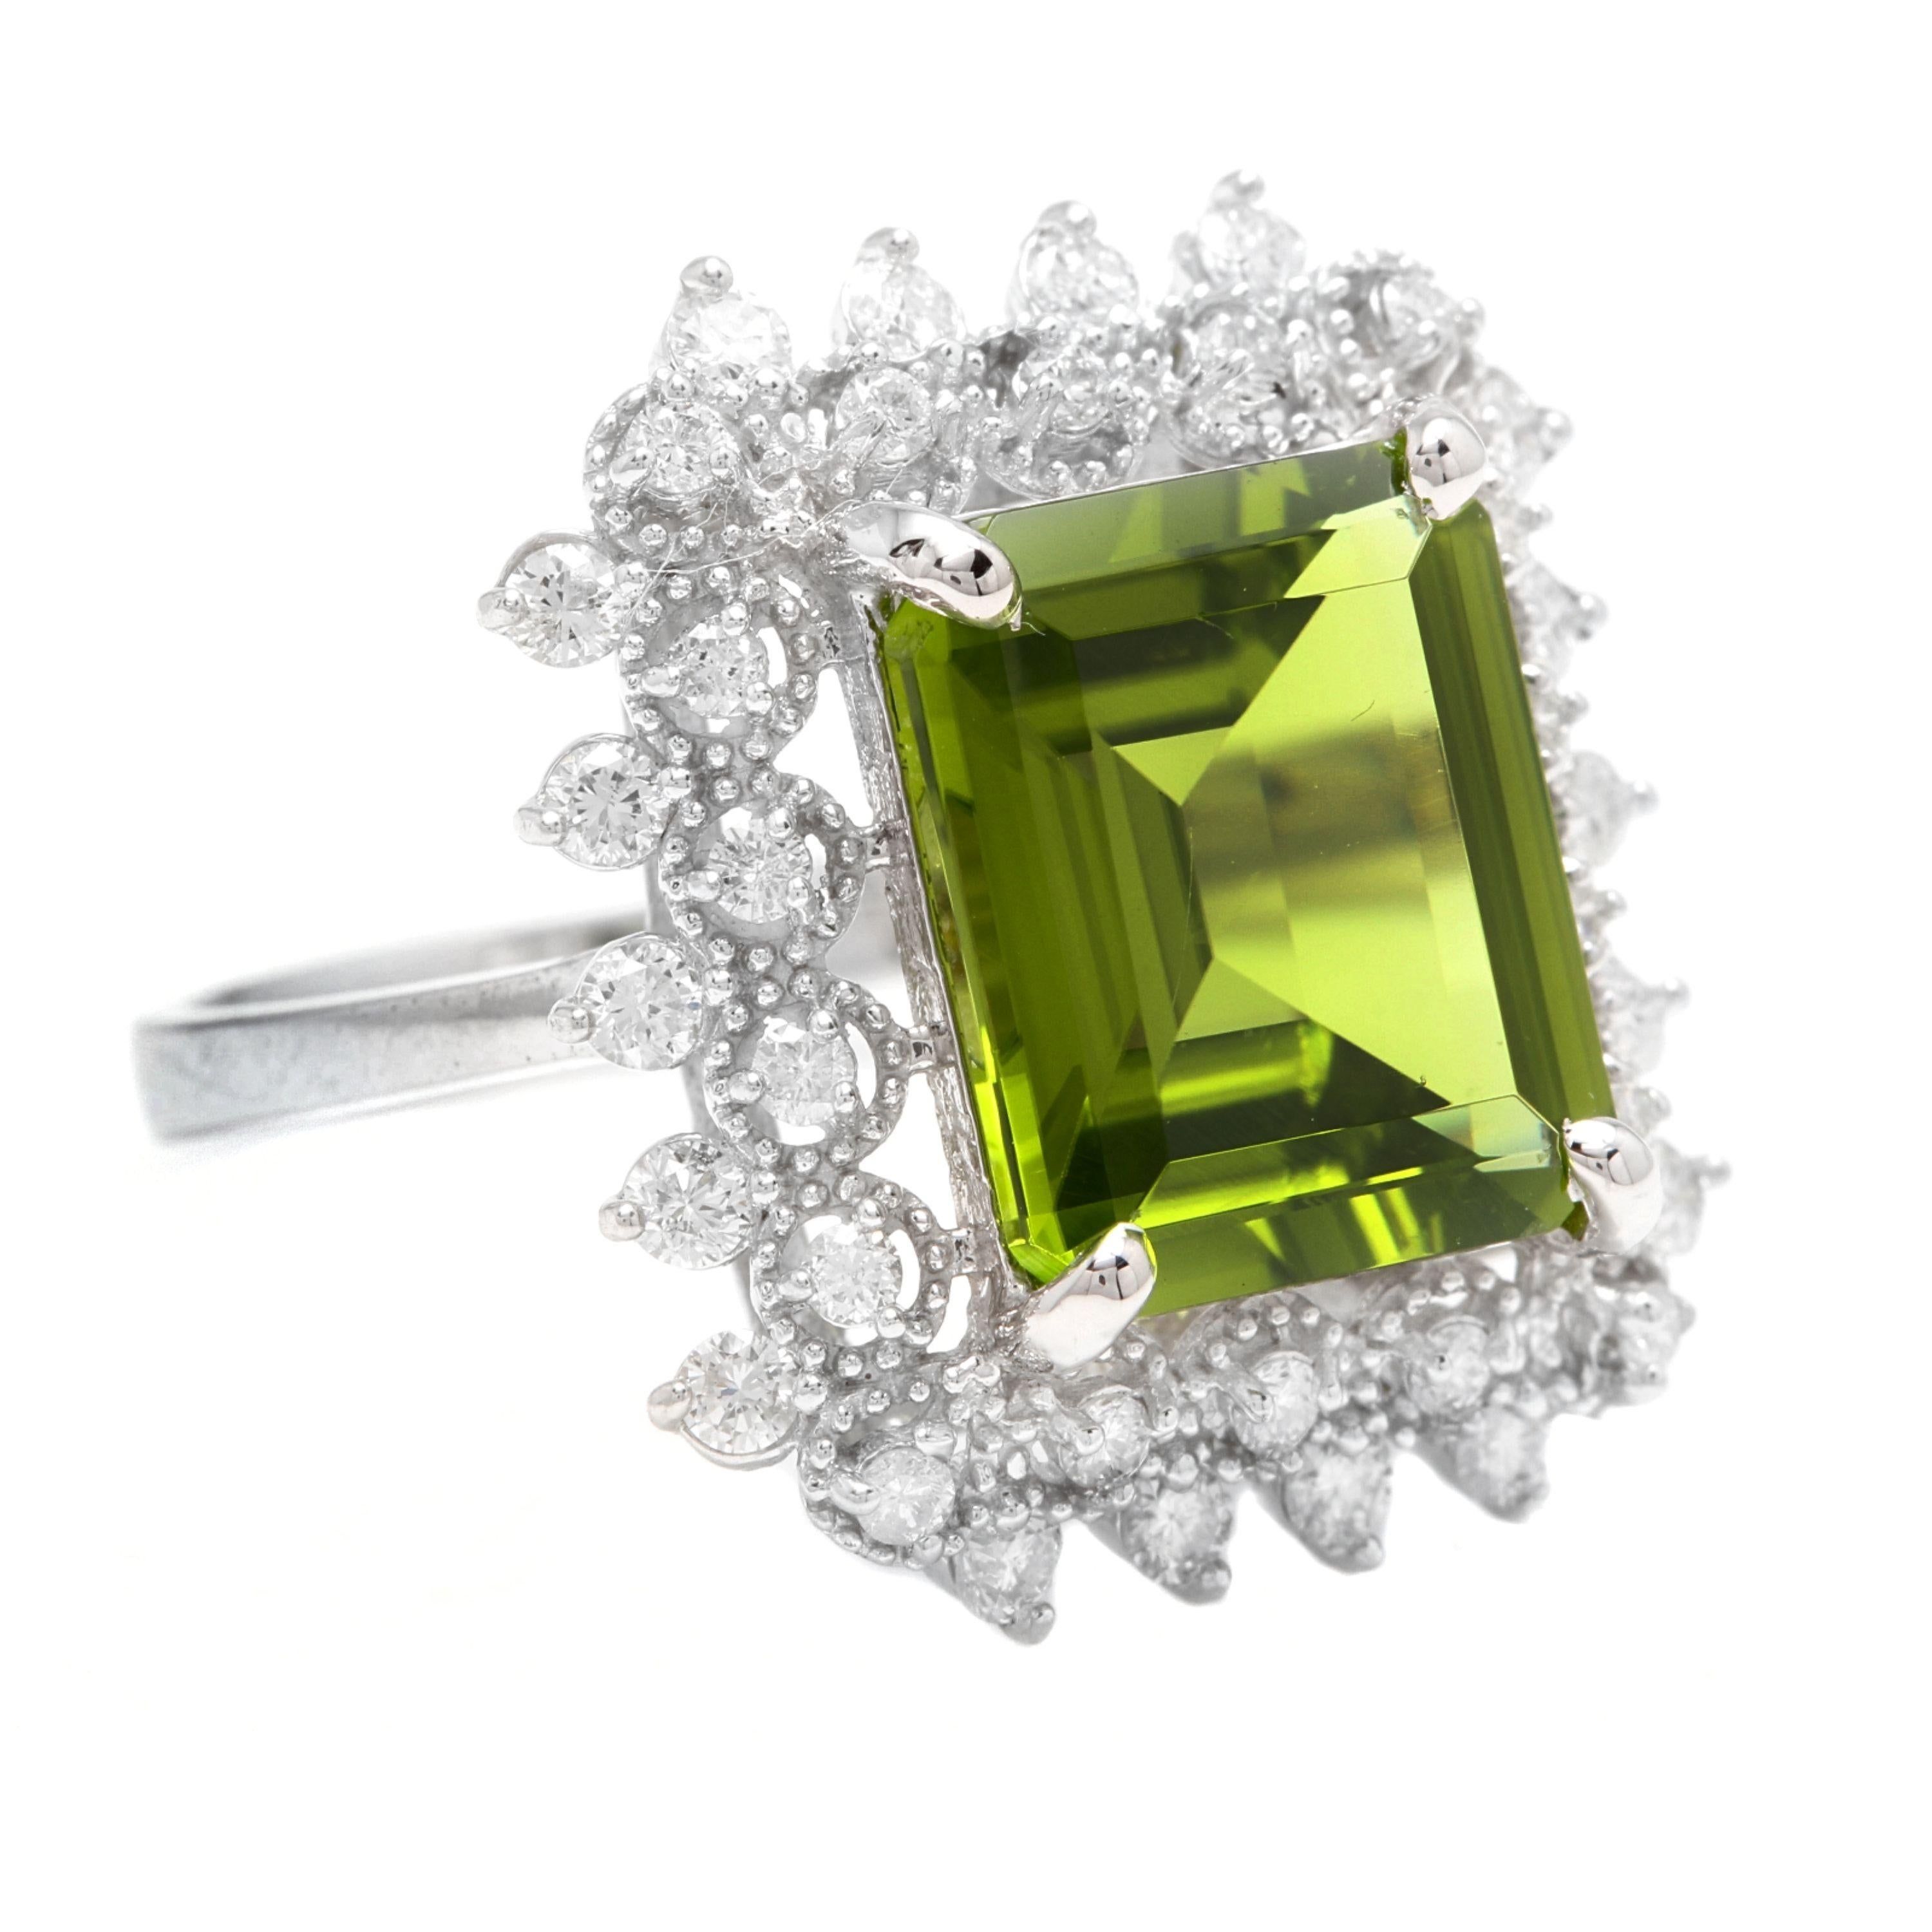 7.00 Carats Natural Very Nice Looking Peridot and Diamond 14K Solid White Gold Ring

Stamped: 14K

Total Natural Emerald Cut Peridot Weight is: Approx. 6.20 Carats

Peridot Measures: Approx. 12 x 10mm

Natural Round Diamonds Weight: Approx. 0.80